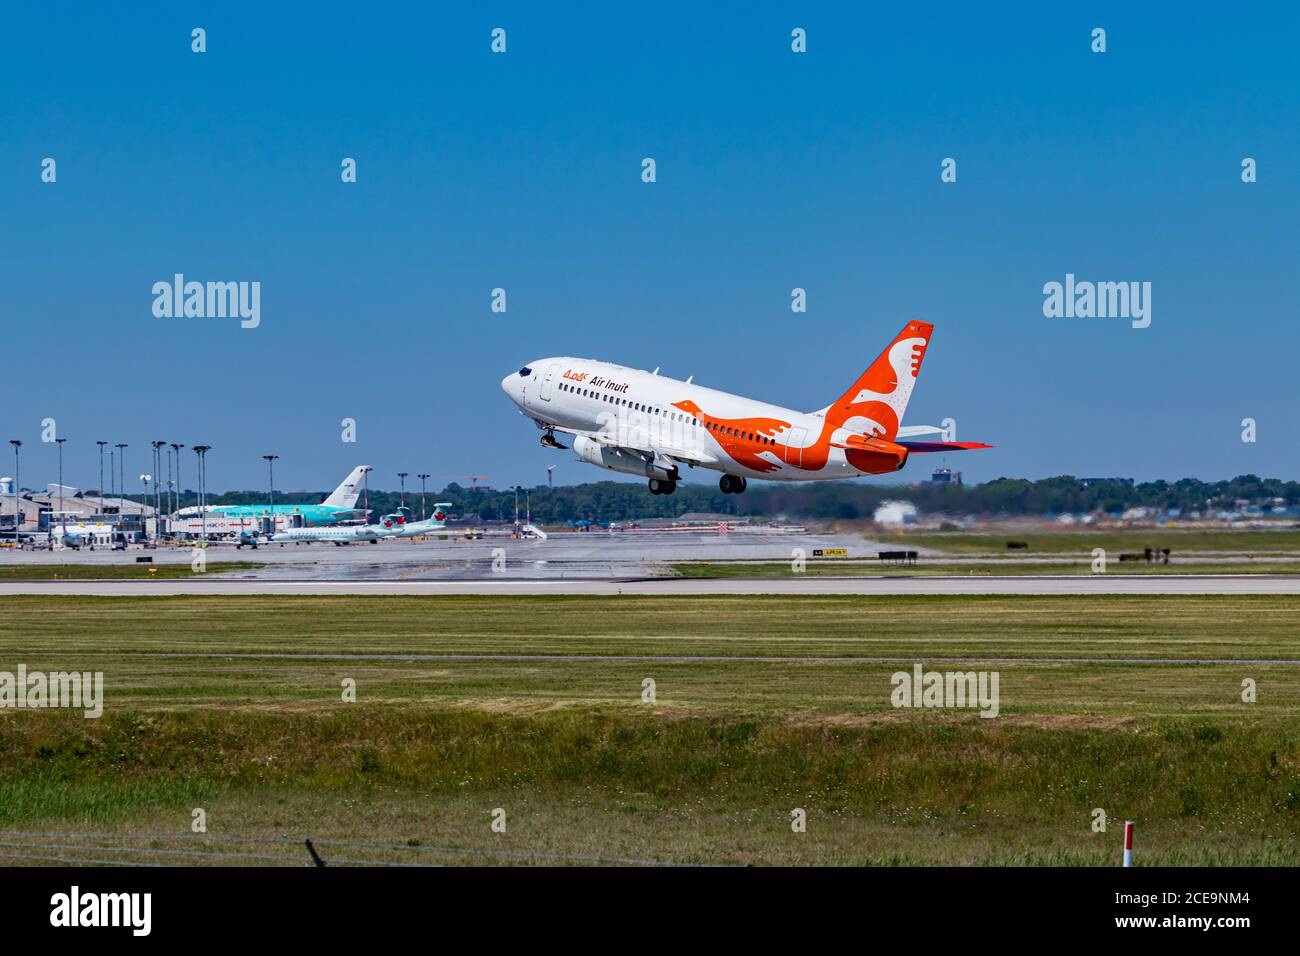 Montreal, Quebec / Canada - 06/20-2020 : An Air Inuit 737-200 aircraft taking off from Montreals Trudeau Airport (CYUL). Stock Photo